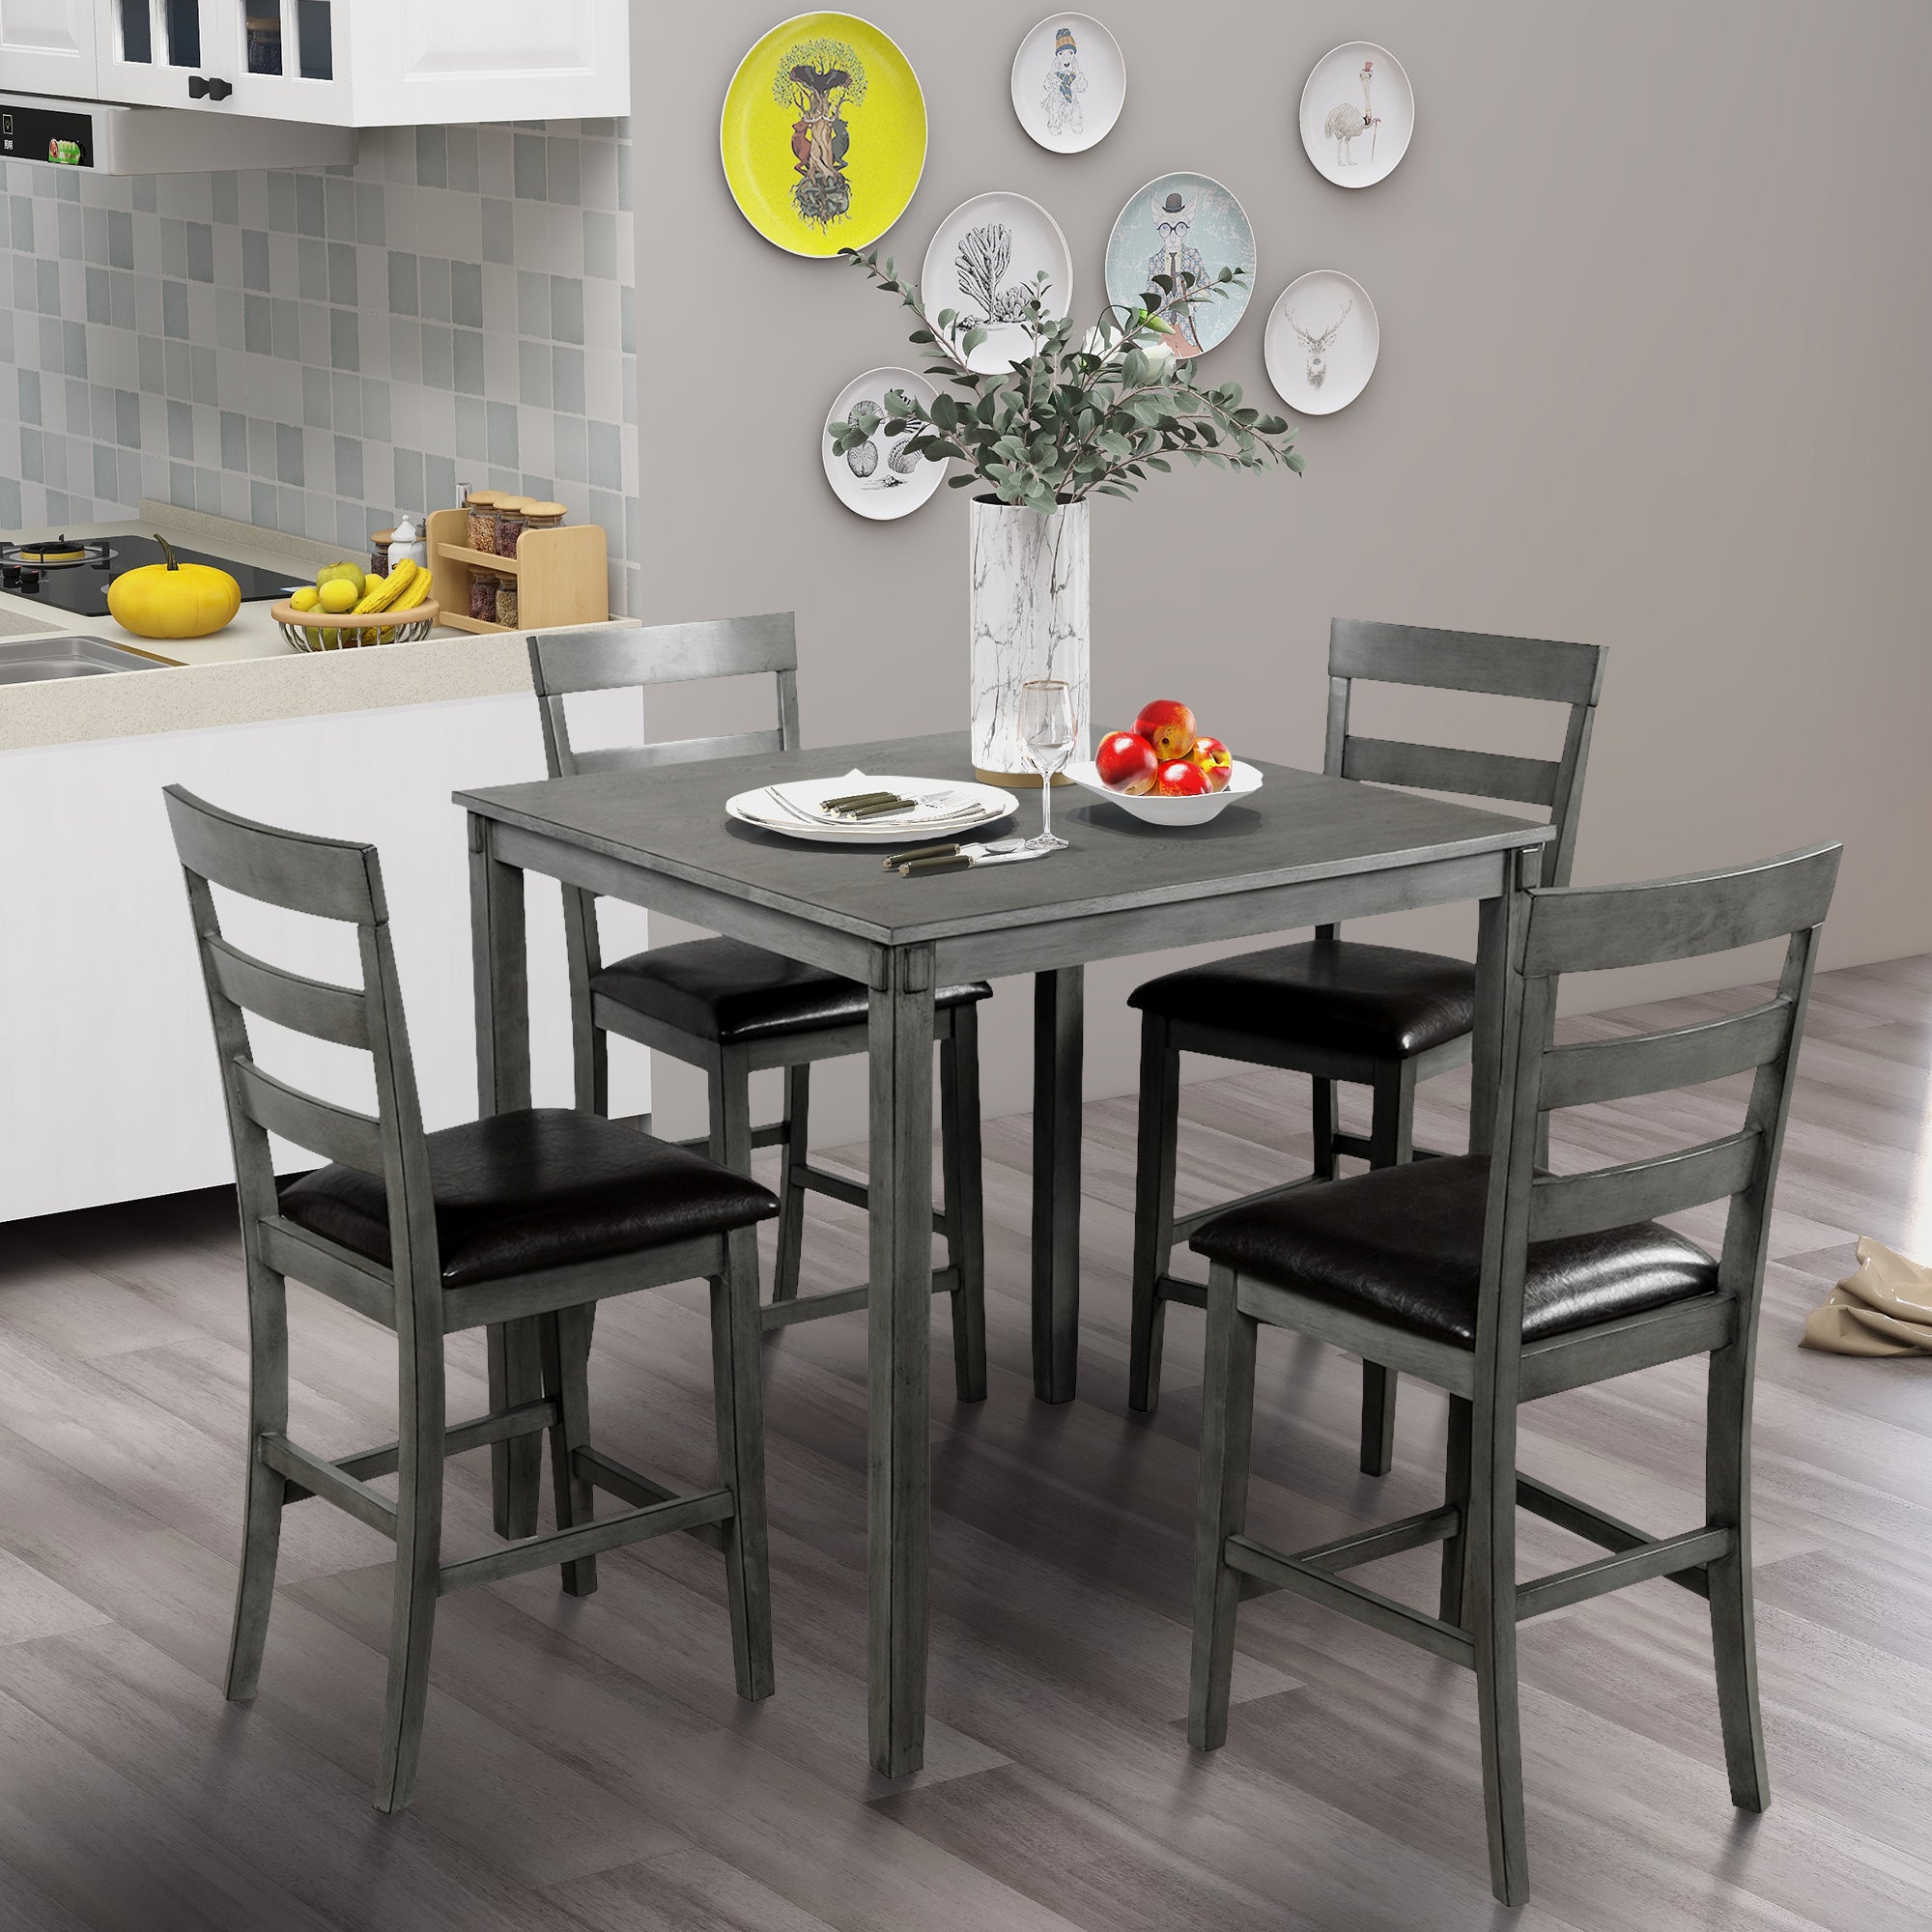 Grey Square Counter Height Wooden Dining Set